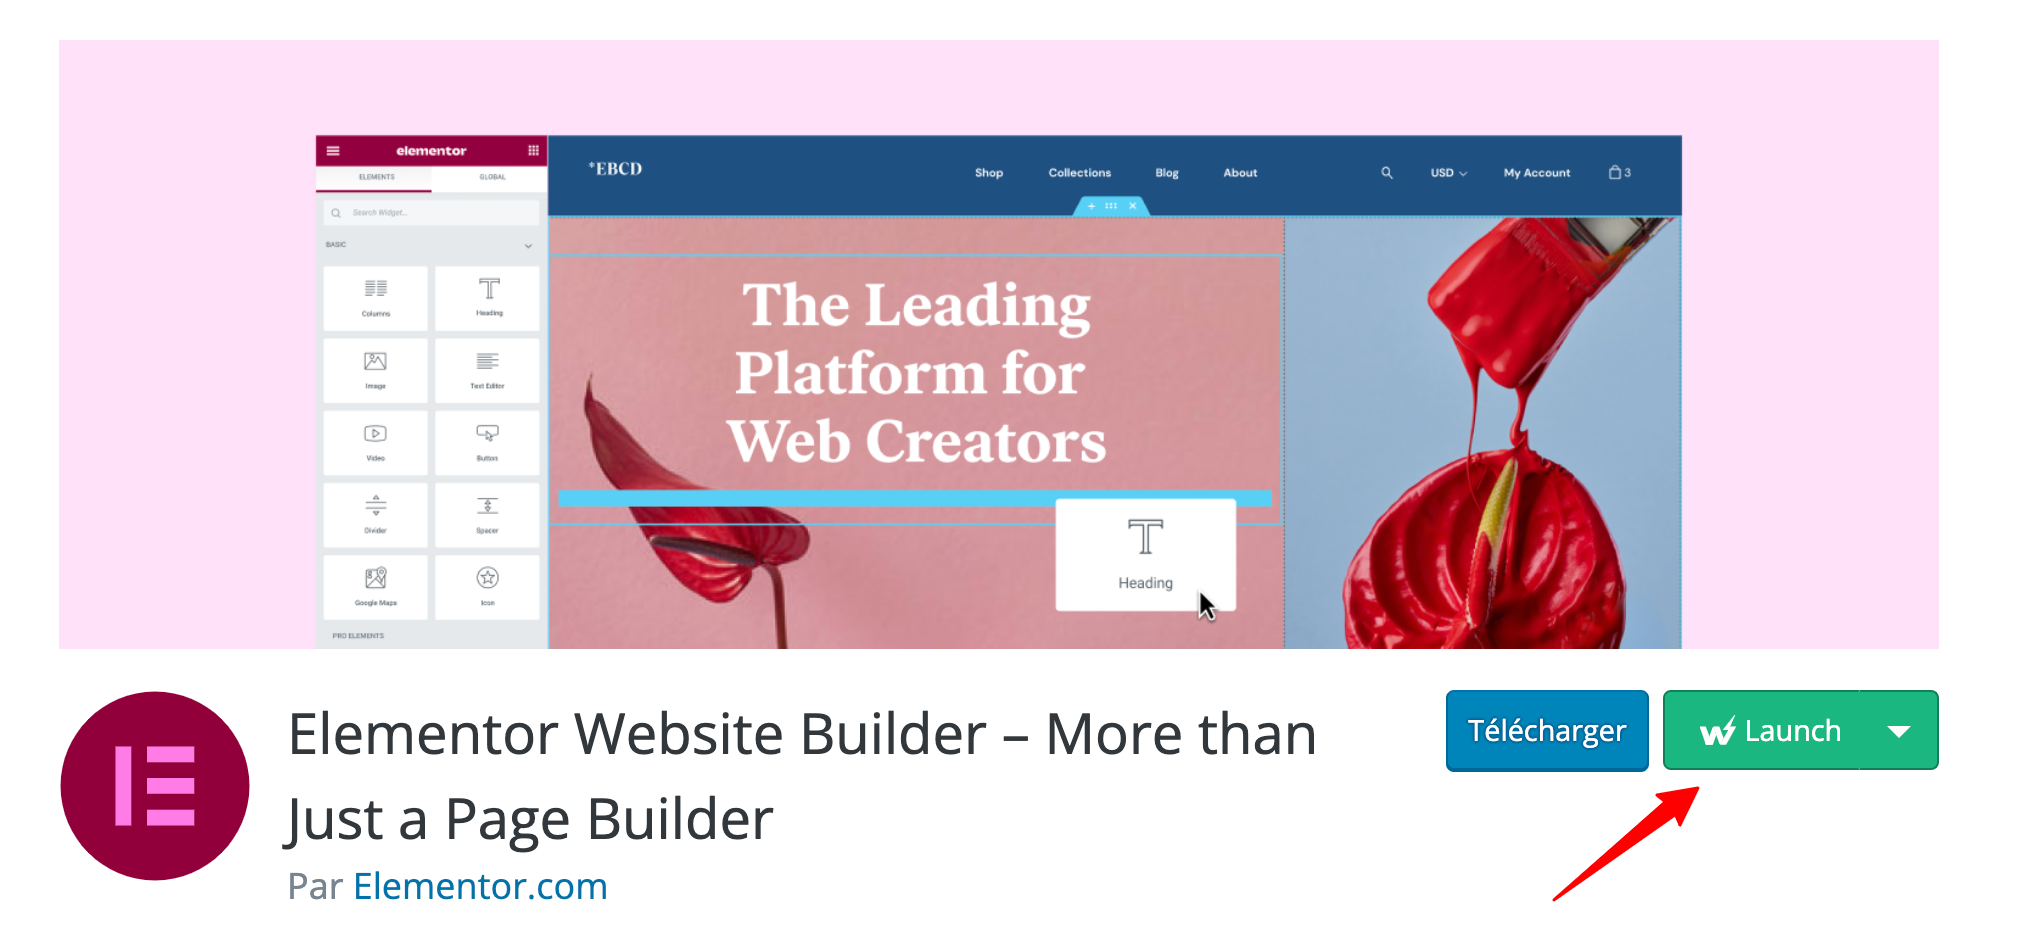 The InstaWP "Launcher" extension allows you to quickly test WordPress plugins and themes.